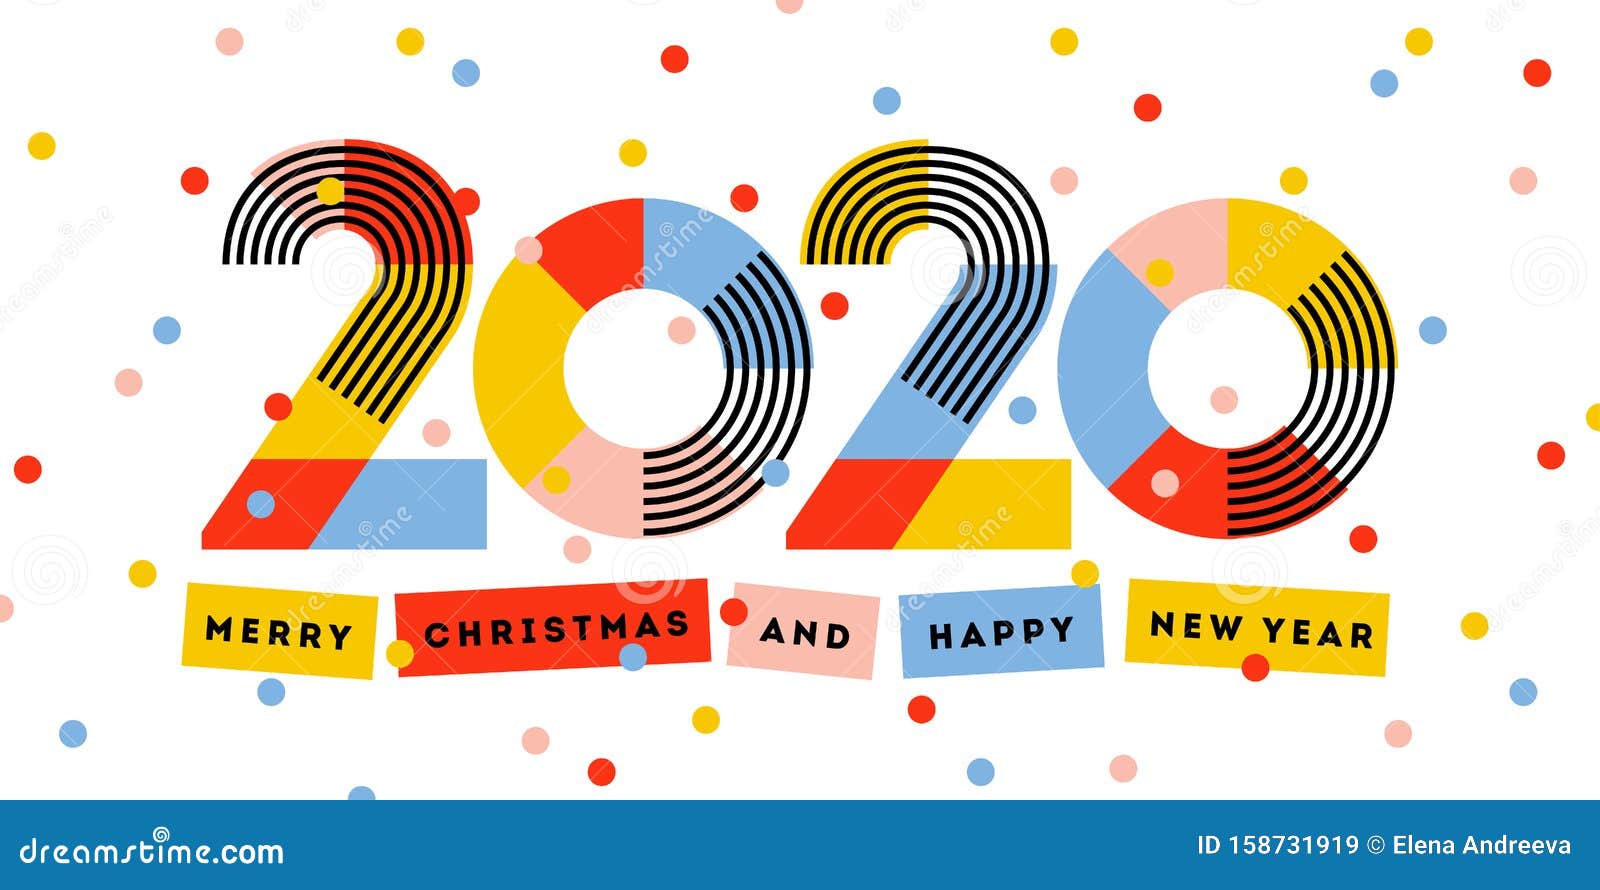 Merry Christmas And Happy New Year 2020 Greeting Card. Multicolored Abstract Numbers With ...